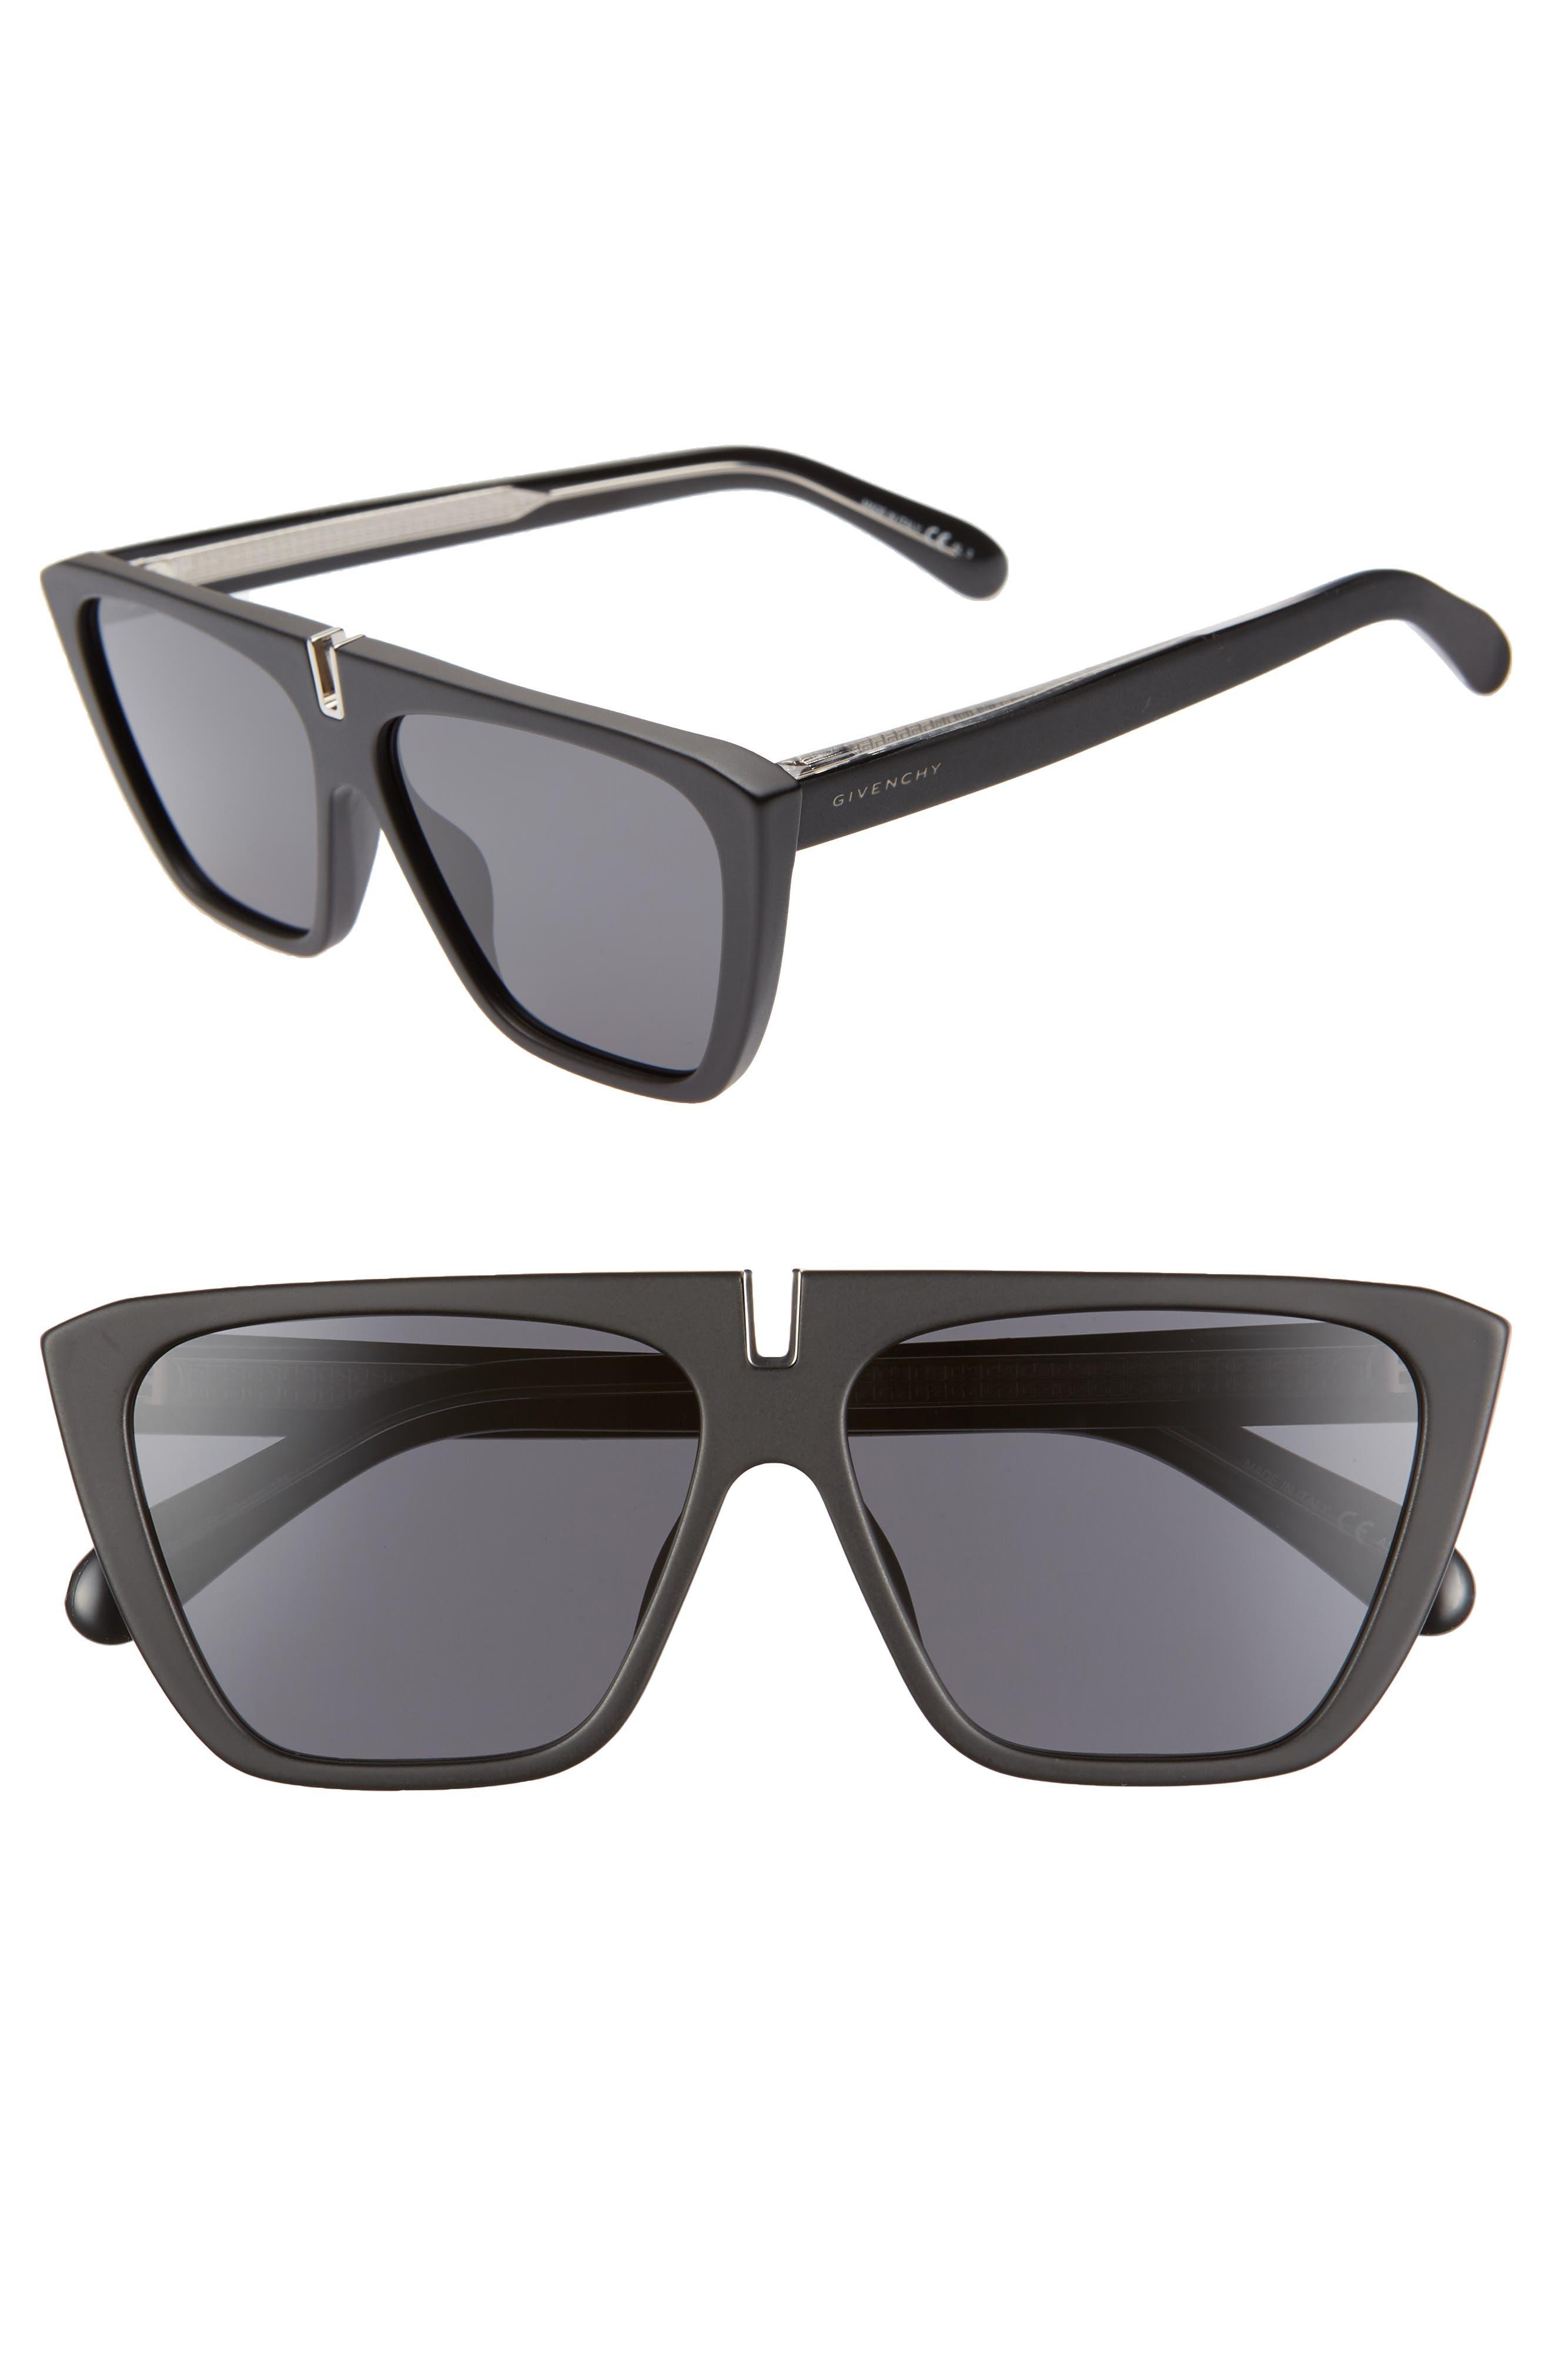 Givenchy 58mm Flat Top Sunglasses in Black | Lyst